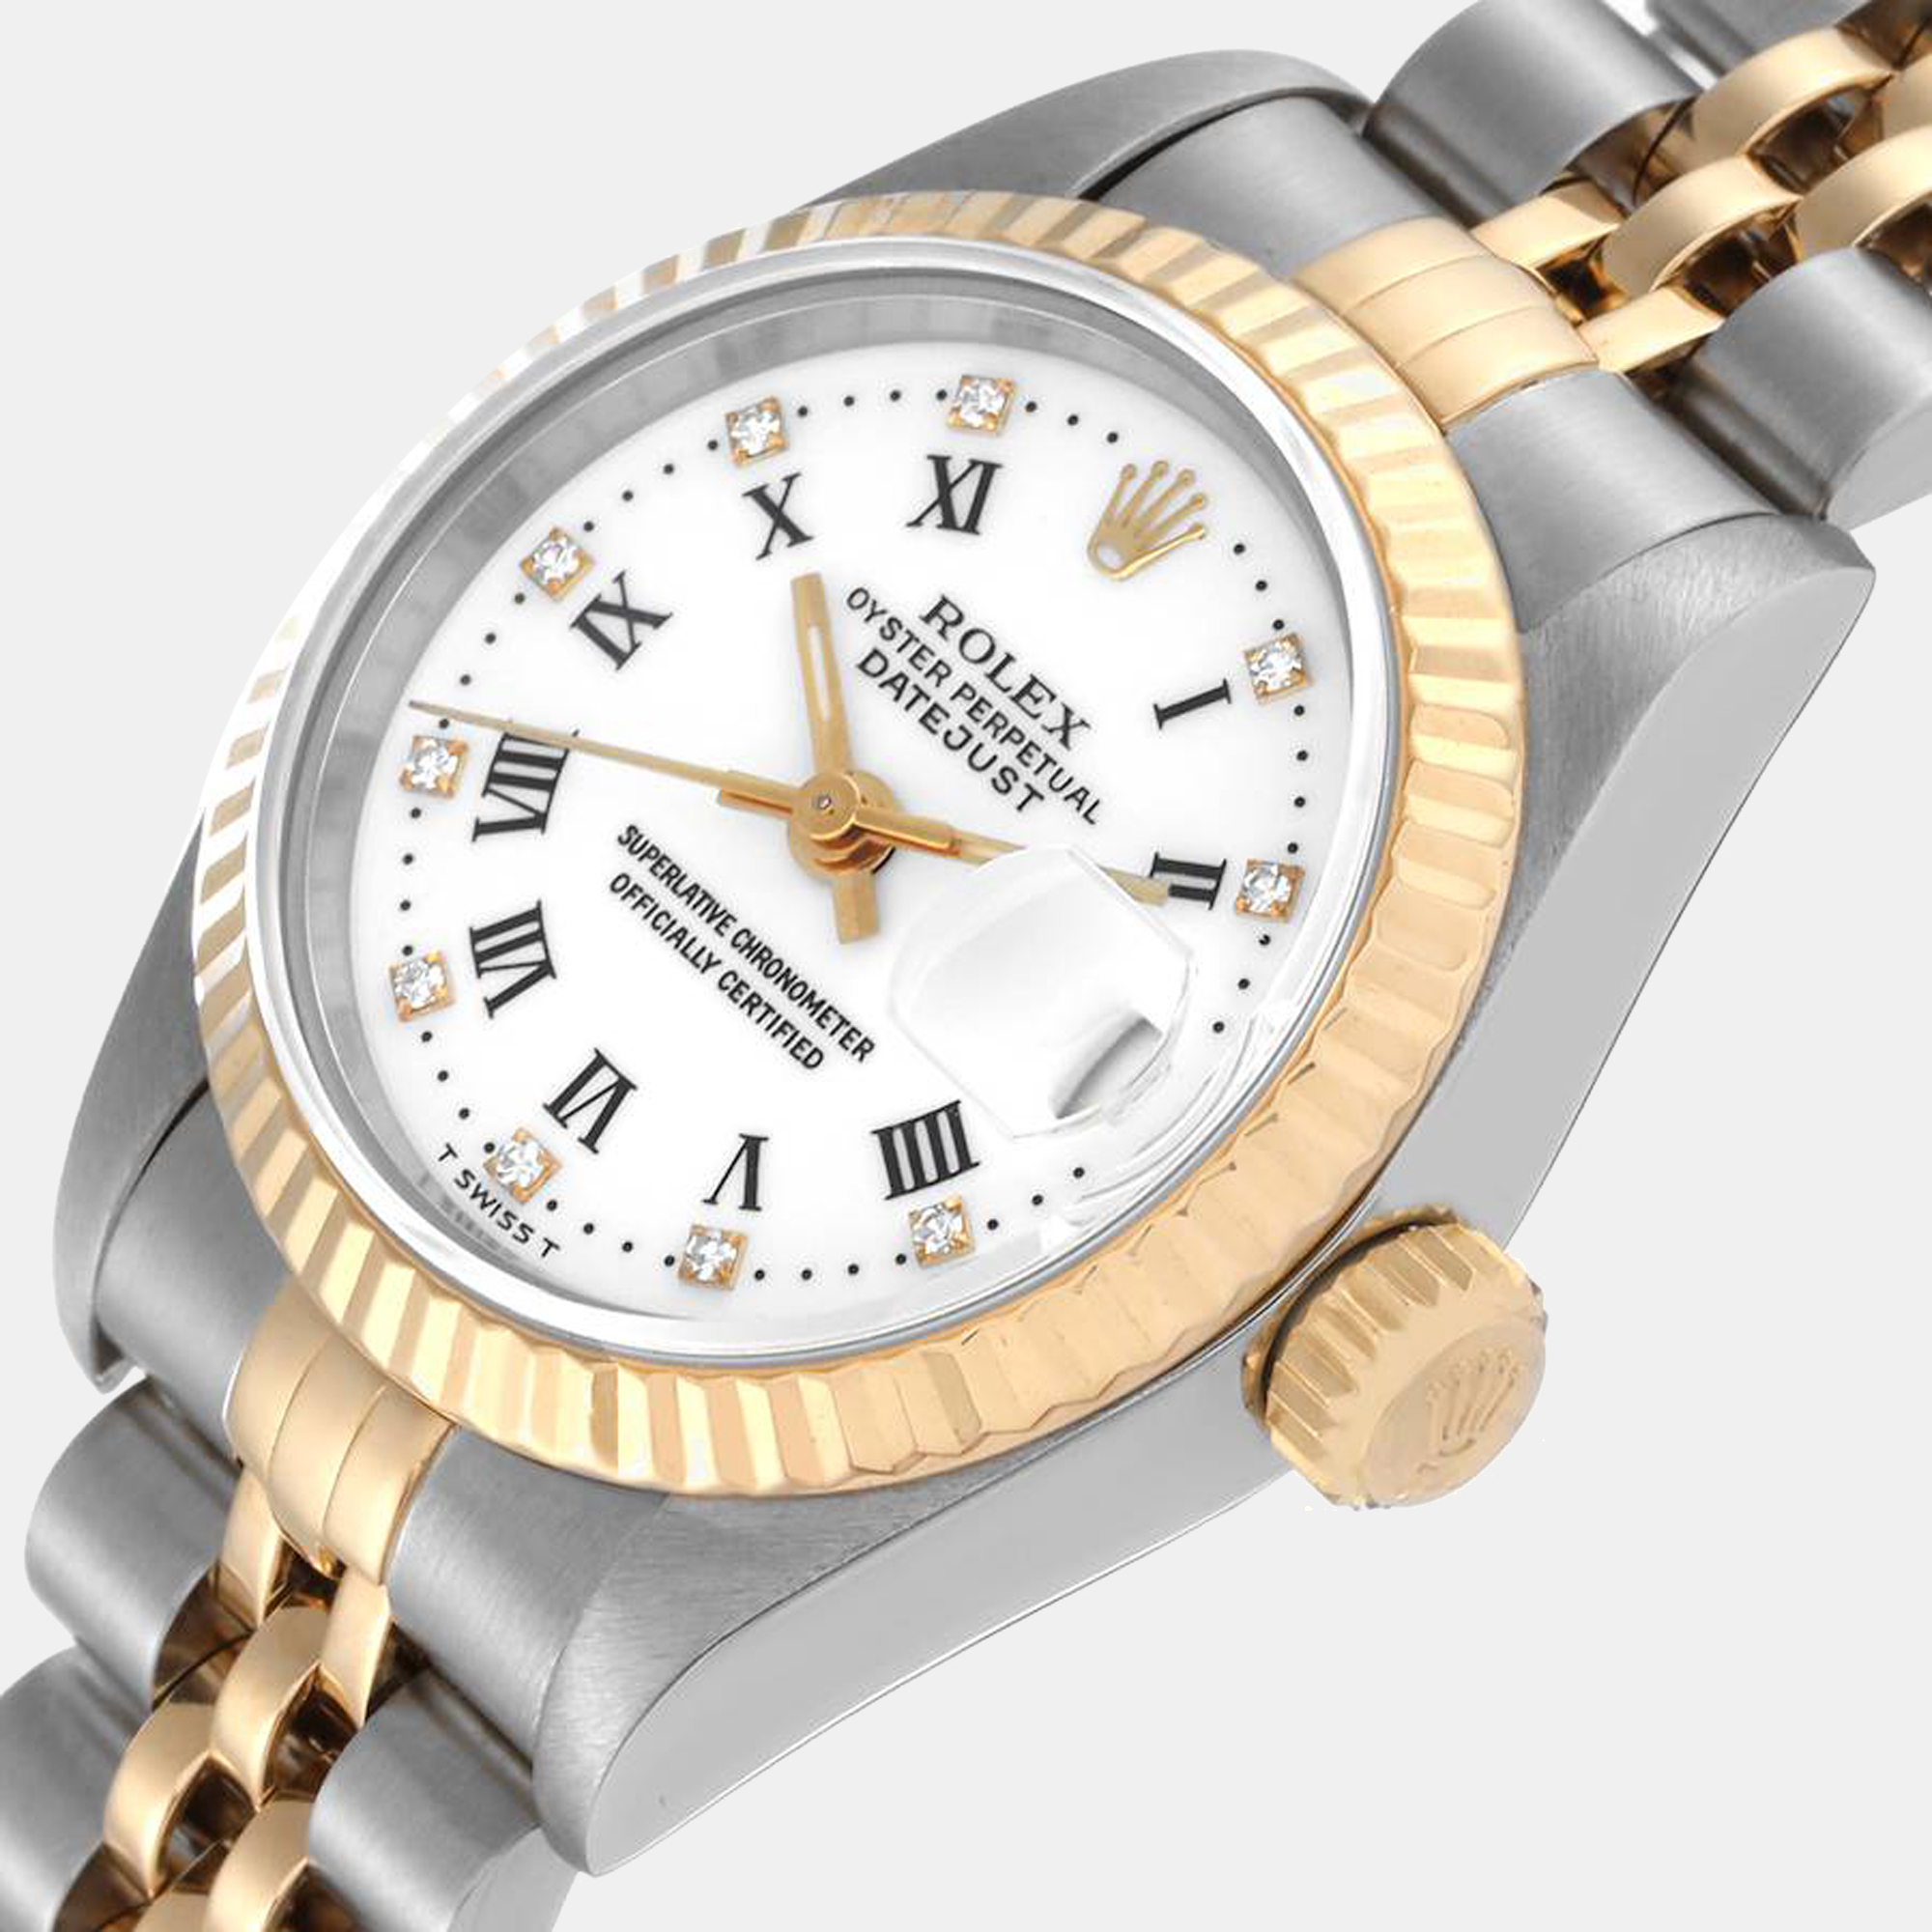 

Rolex White Diamonds 18K Yellow Gold And Stainless Steel Datejust 69173 Women's Wristwatch 26 mm